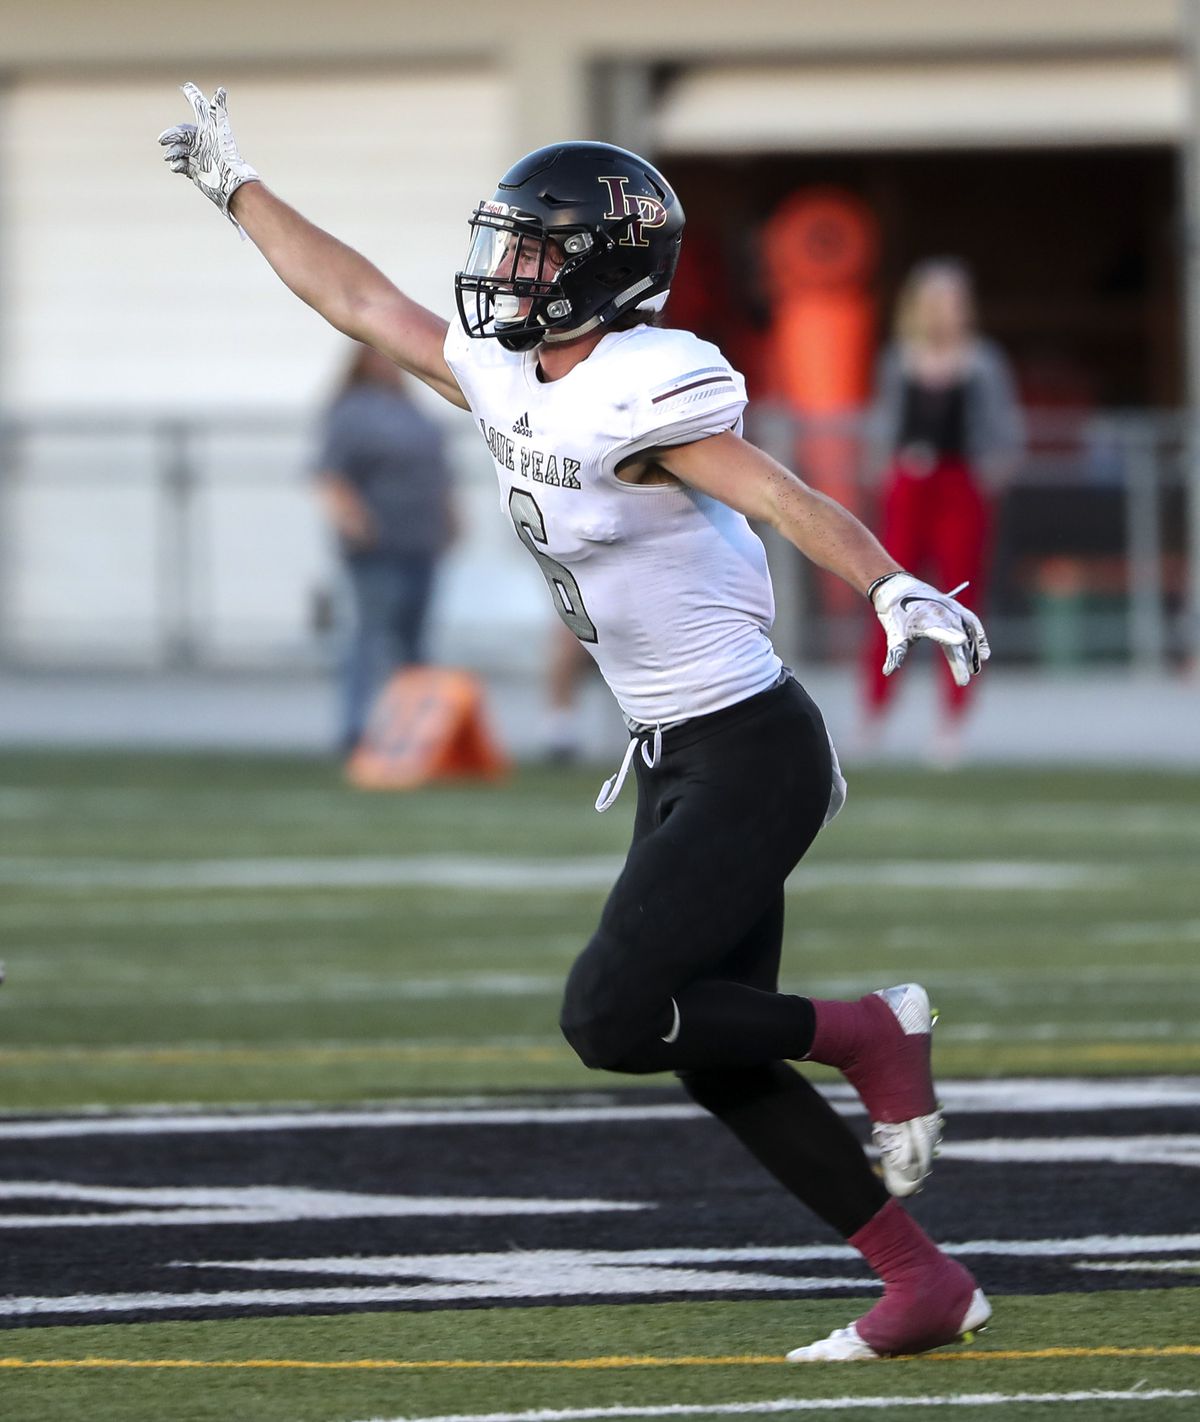 Lone Peak’s Nate Ritchie celebrates after intercepting a Highland pass football game at Highland High School in Salt Lake City on Friday, Sept. 7, 2018.